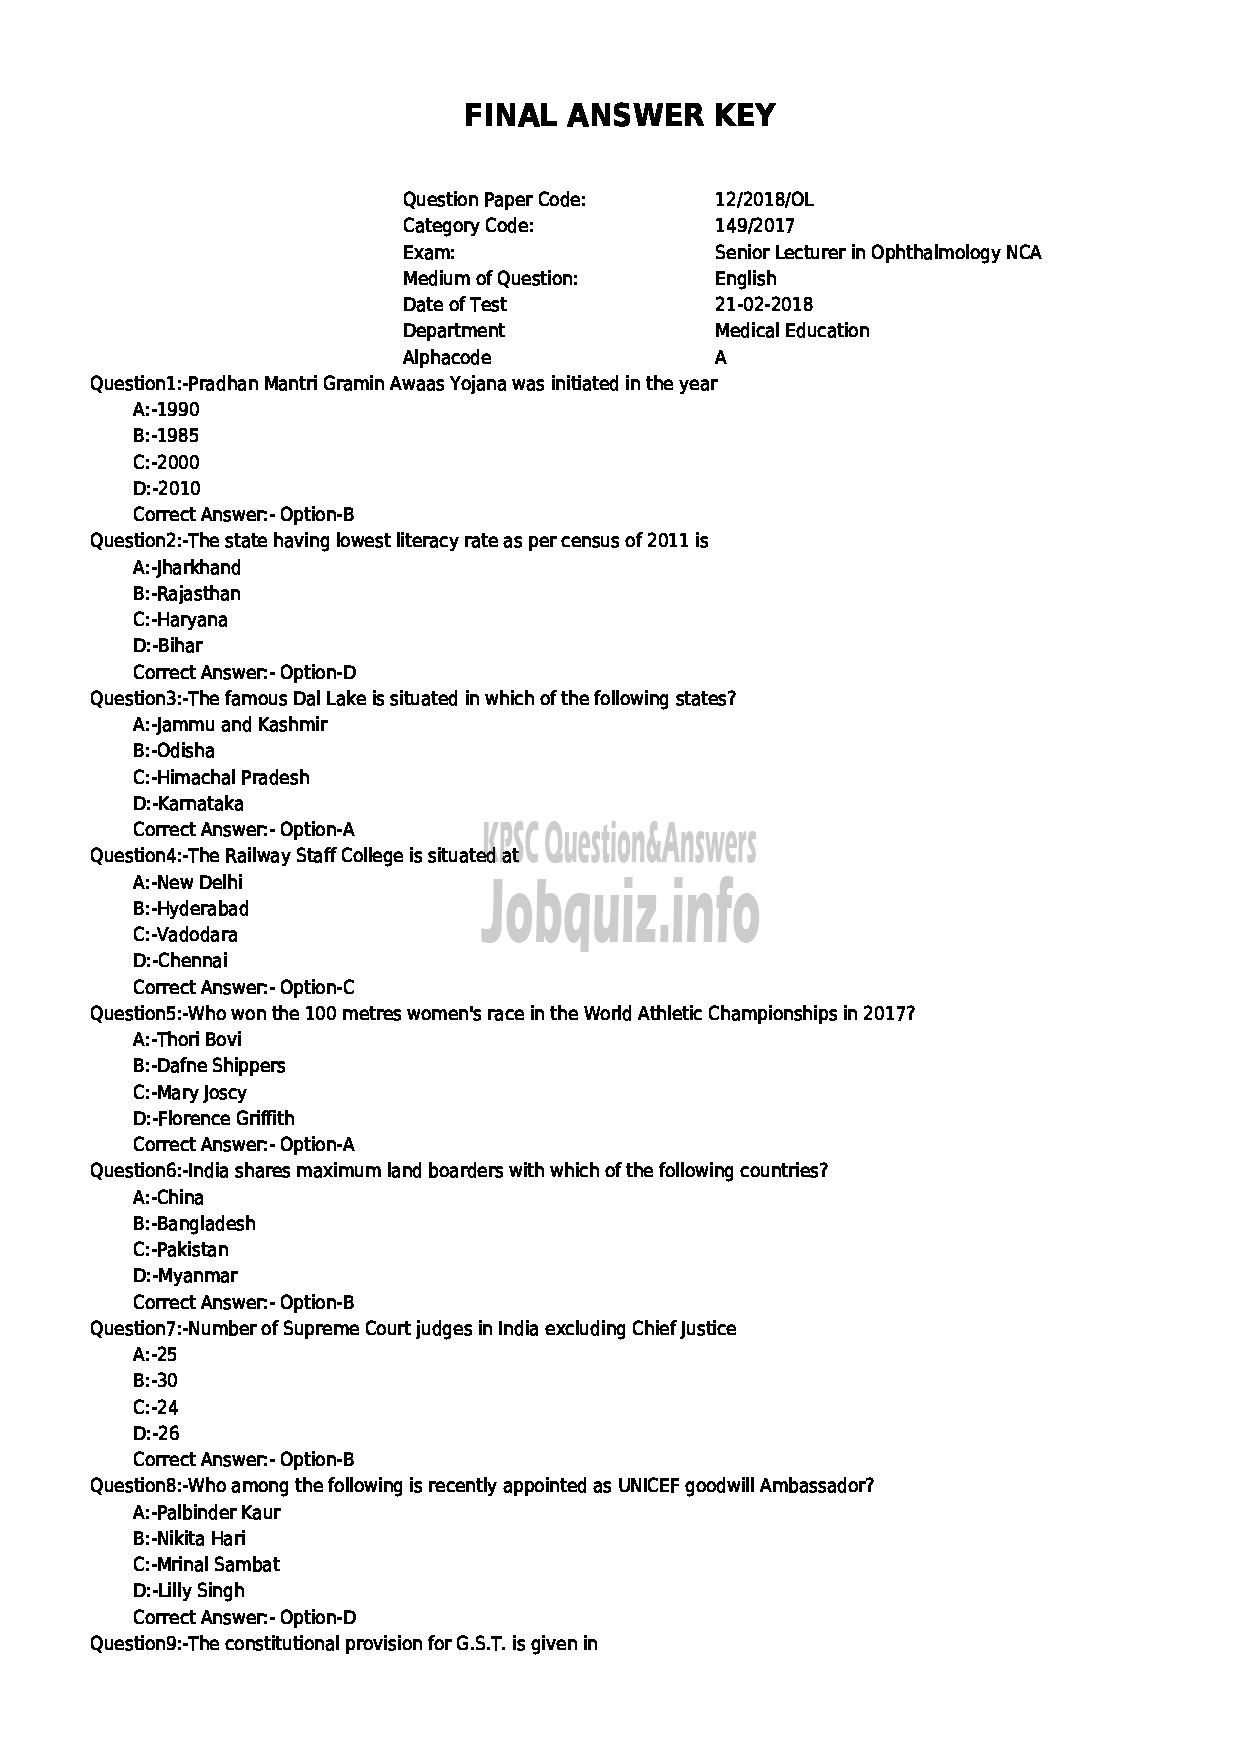 Kerala PSC Question Paper - SENIOR LECTURER IN OPTHALMOLOGY NCA MEDICAL EDUCATION-1